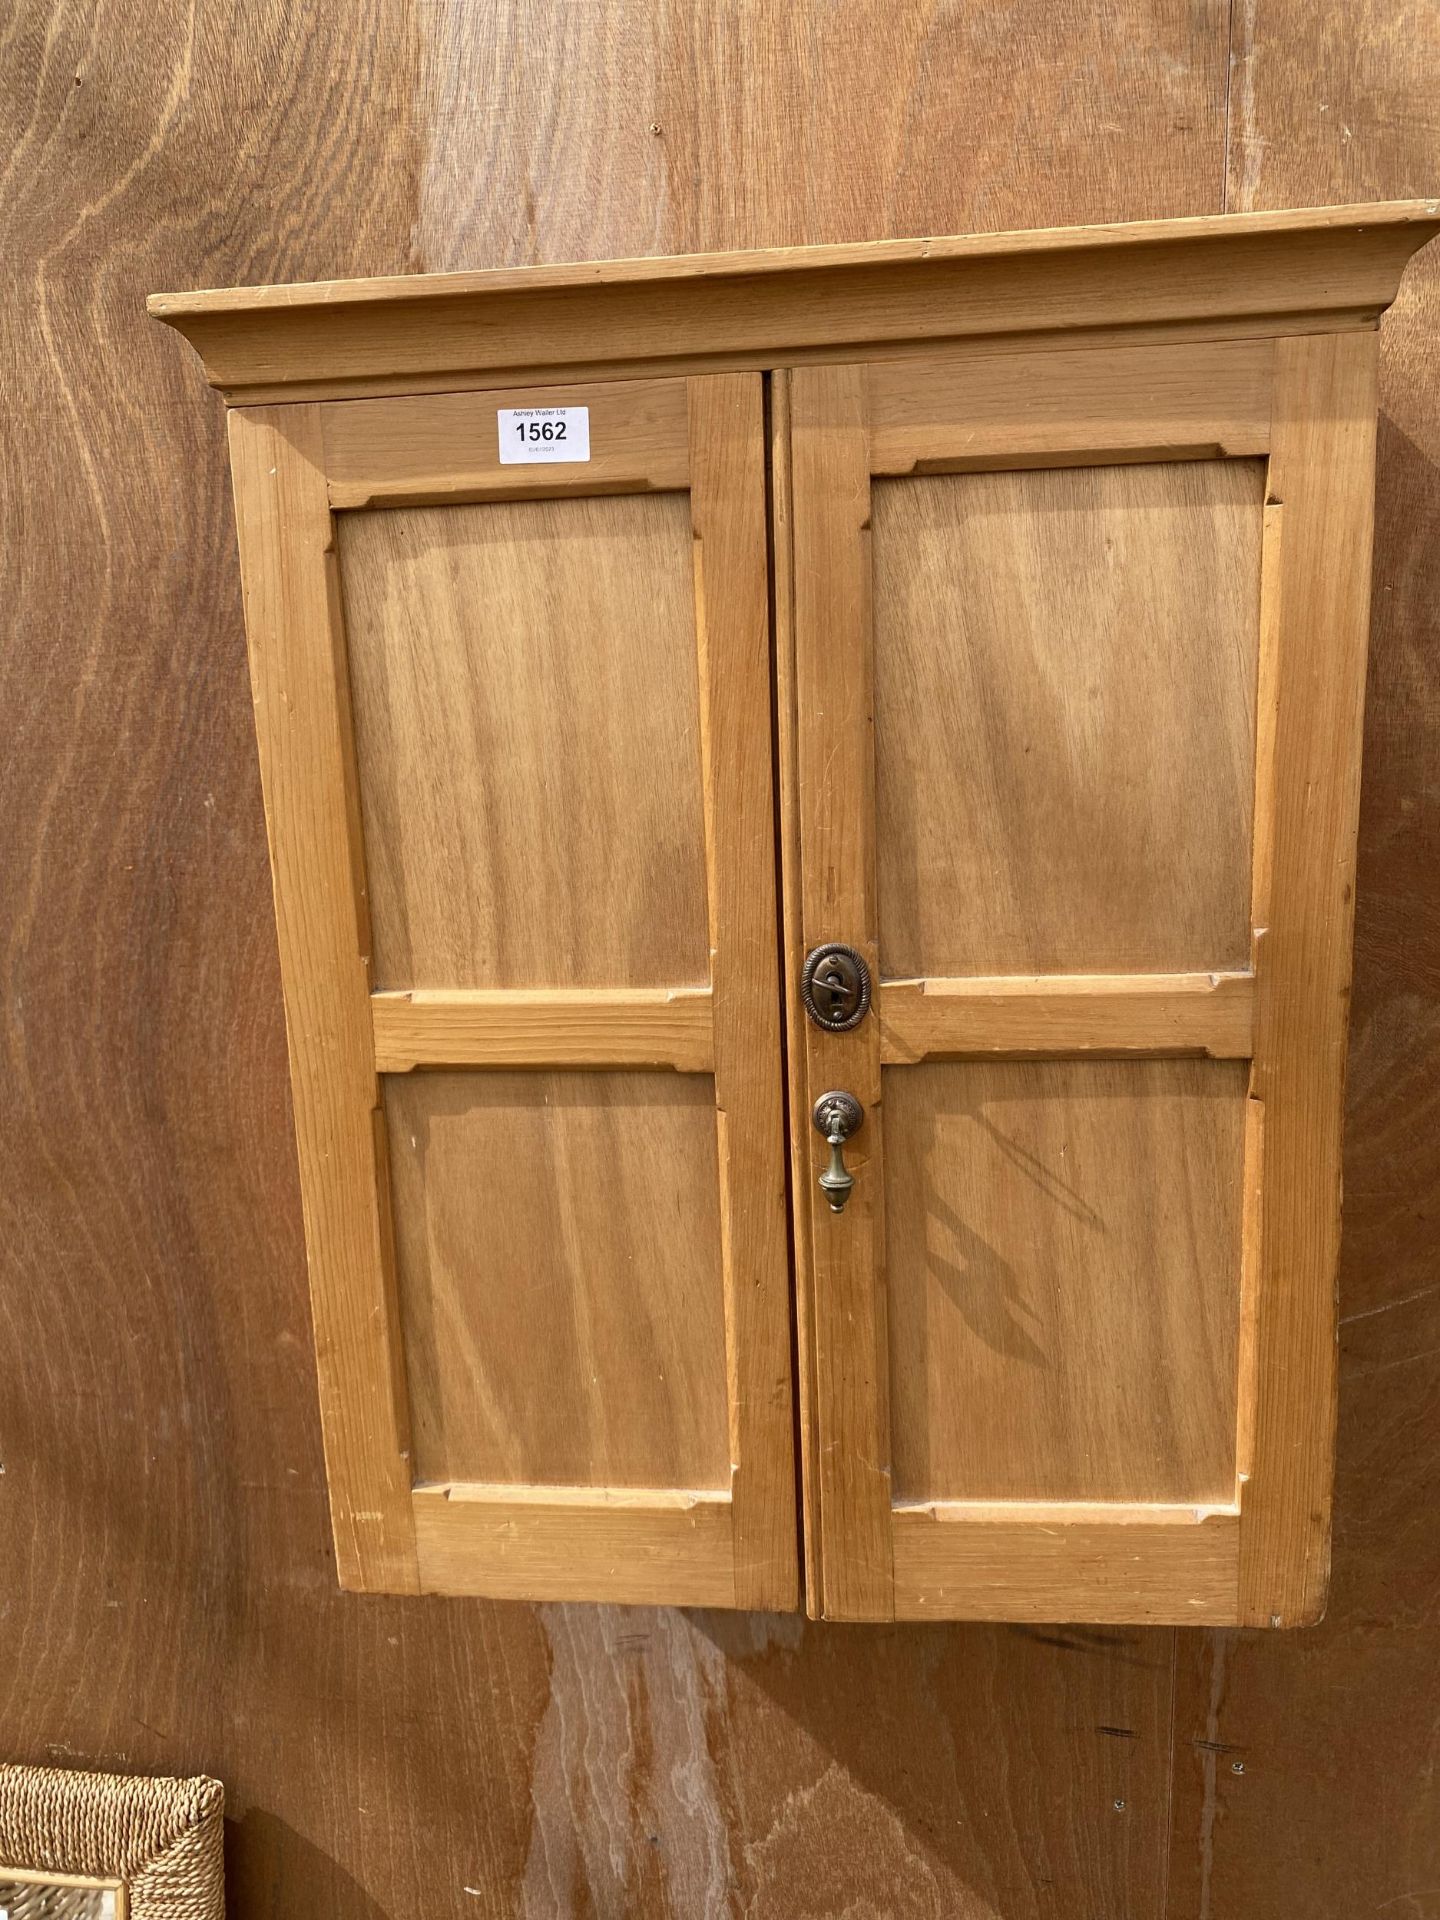 A PINE WALL CUPBOARD WITH THREE INTERNAL SHELVES AND A DRAWER - Image 2 of 5